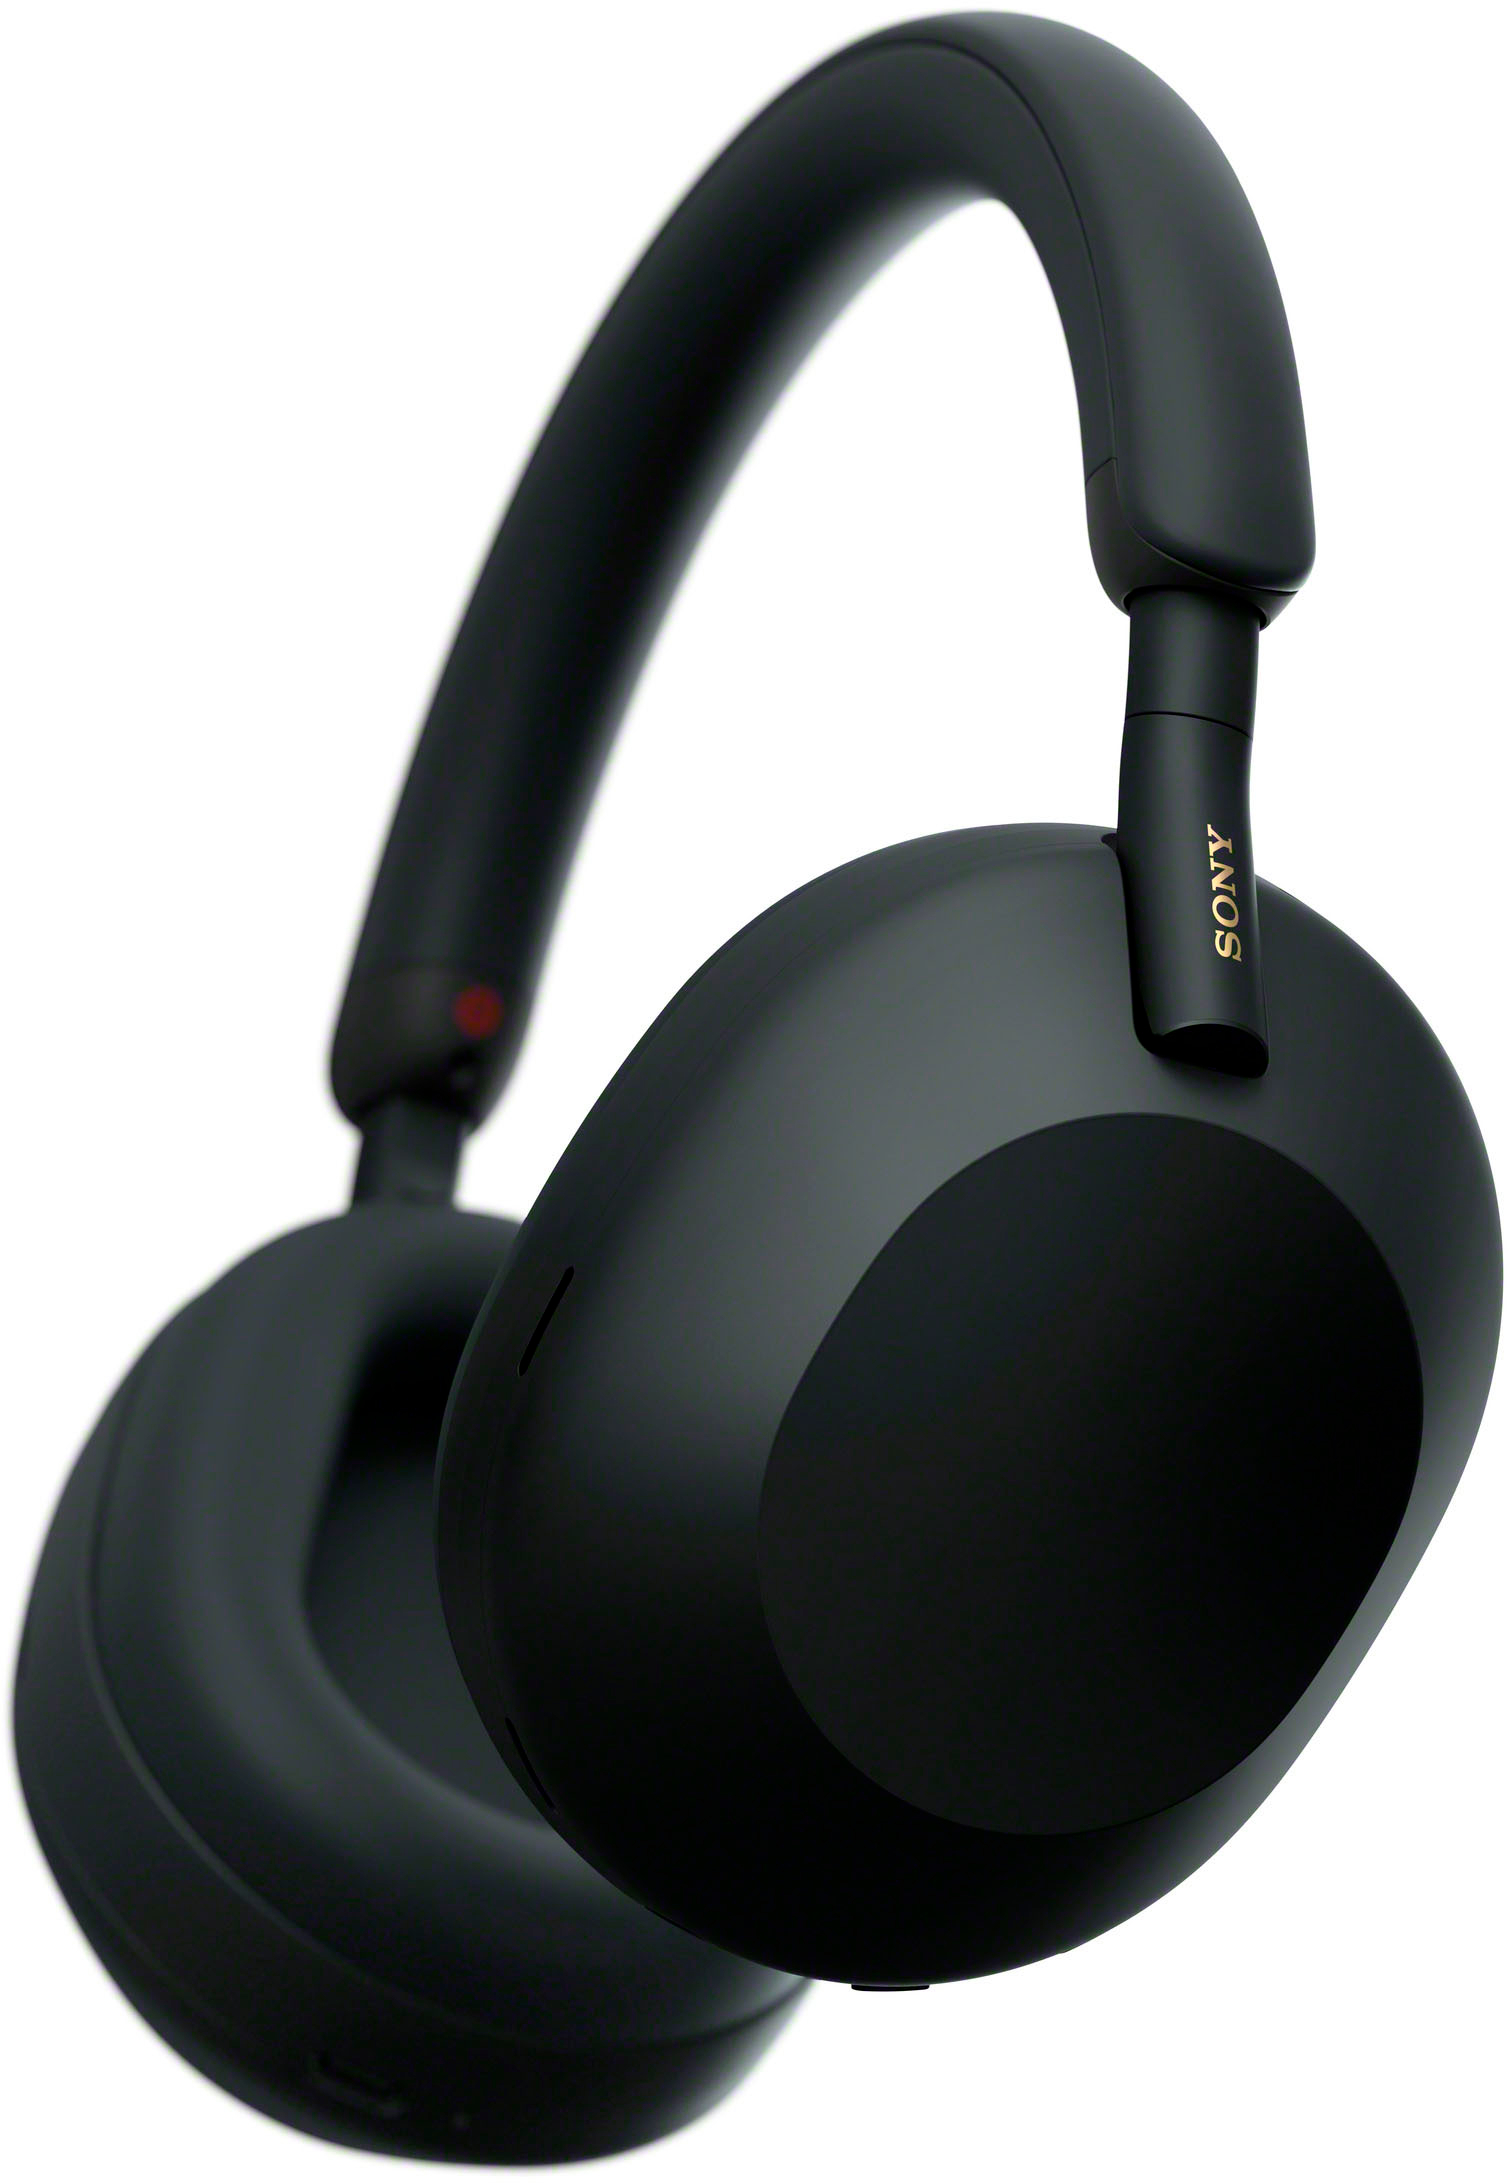 Sony WH-1000XM5 Over-the-Ear Headphones Black WH-1000XM5/B - Buy